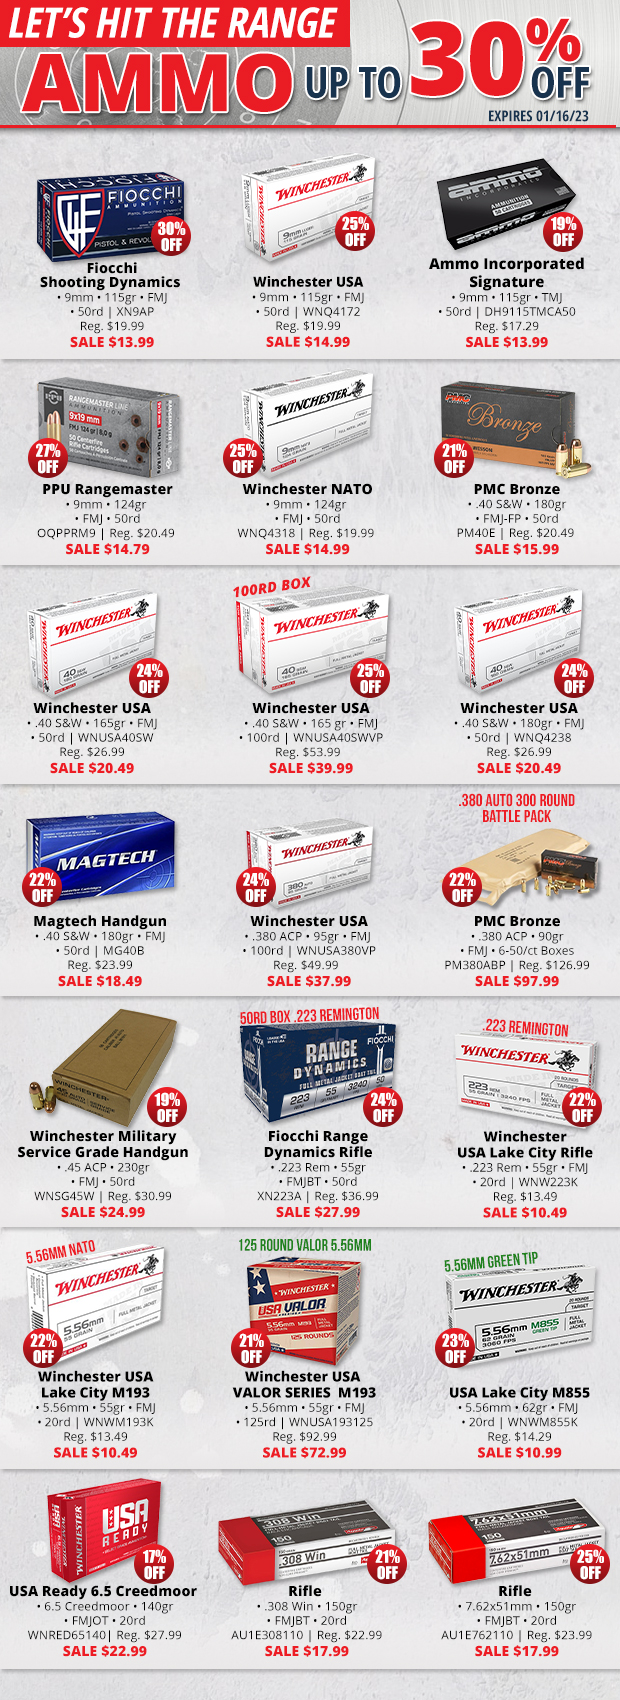 Shop Ammo Up to 30% Off